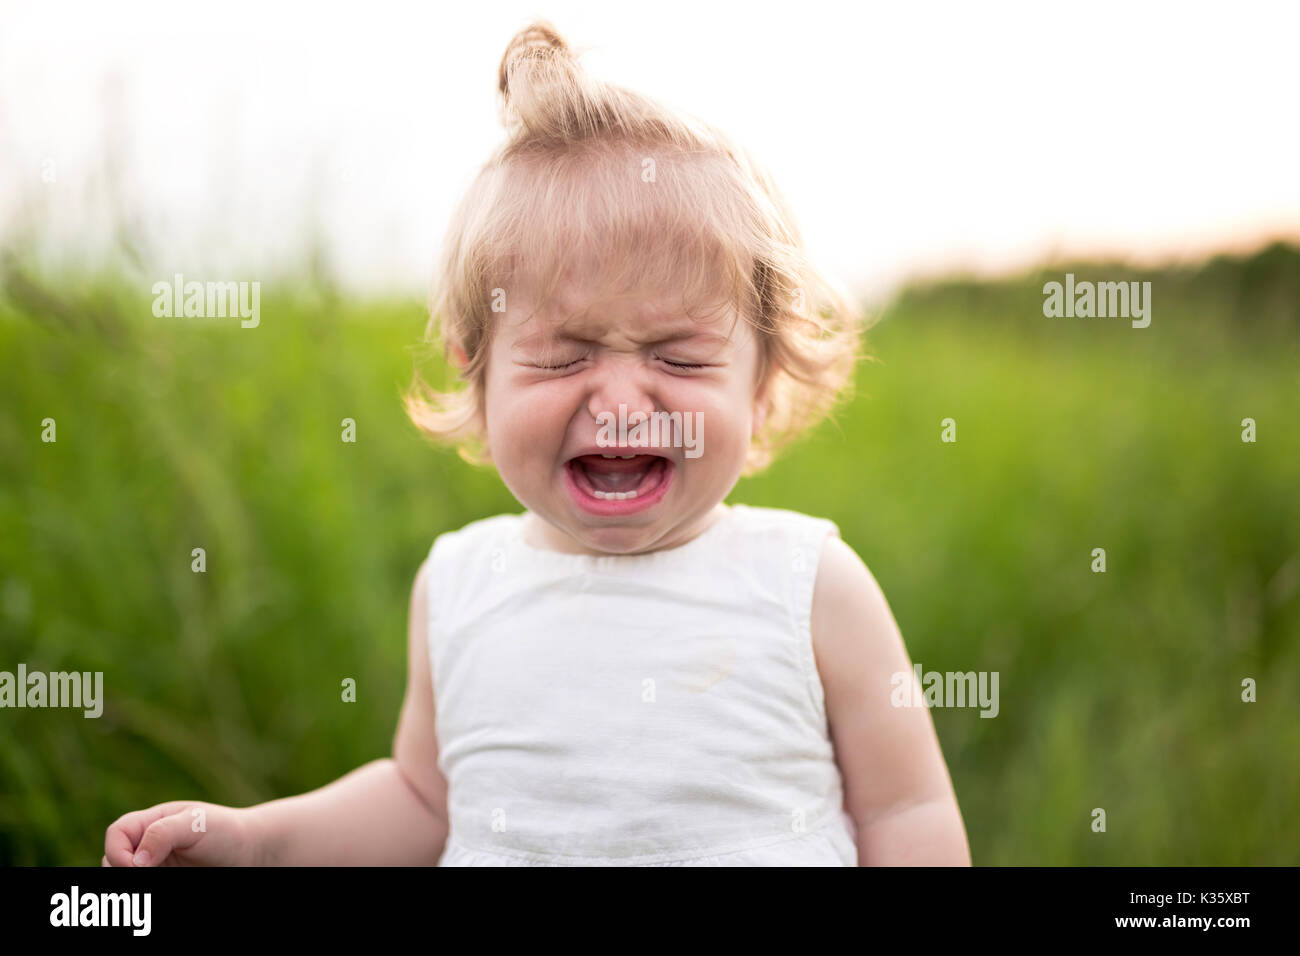 Crying baby alone in the meadow Stock Photo